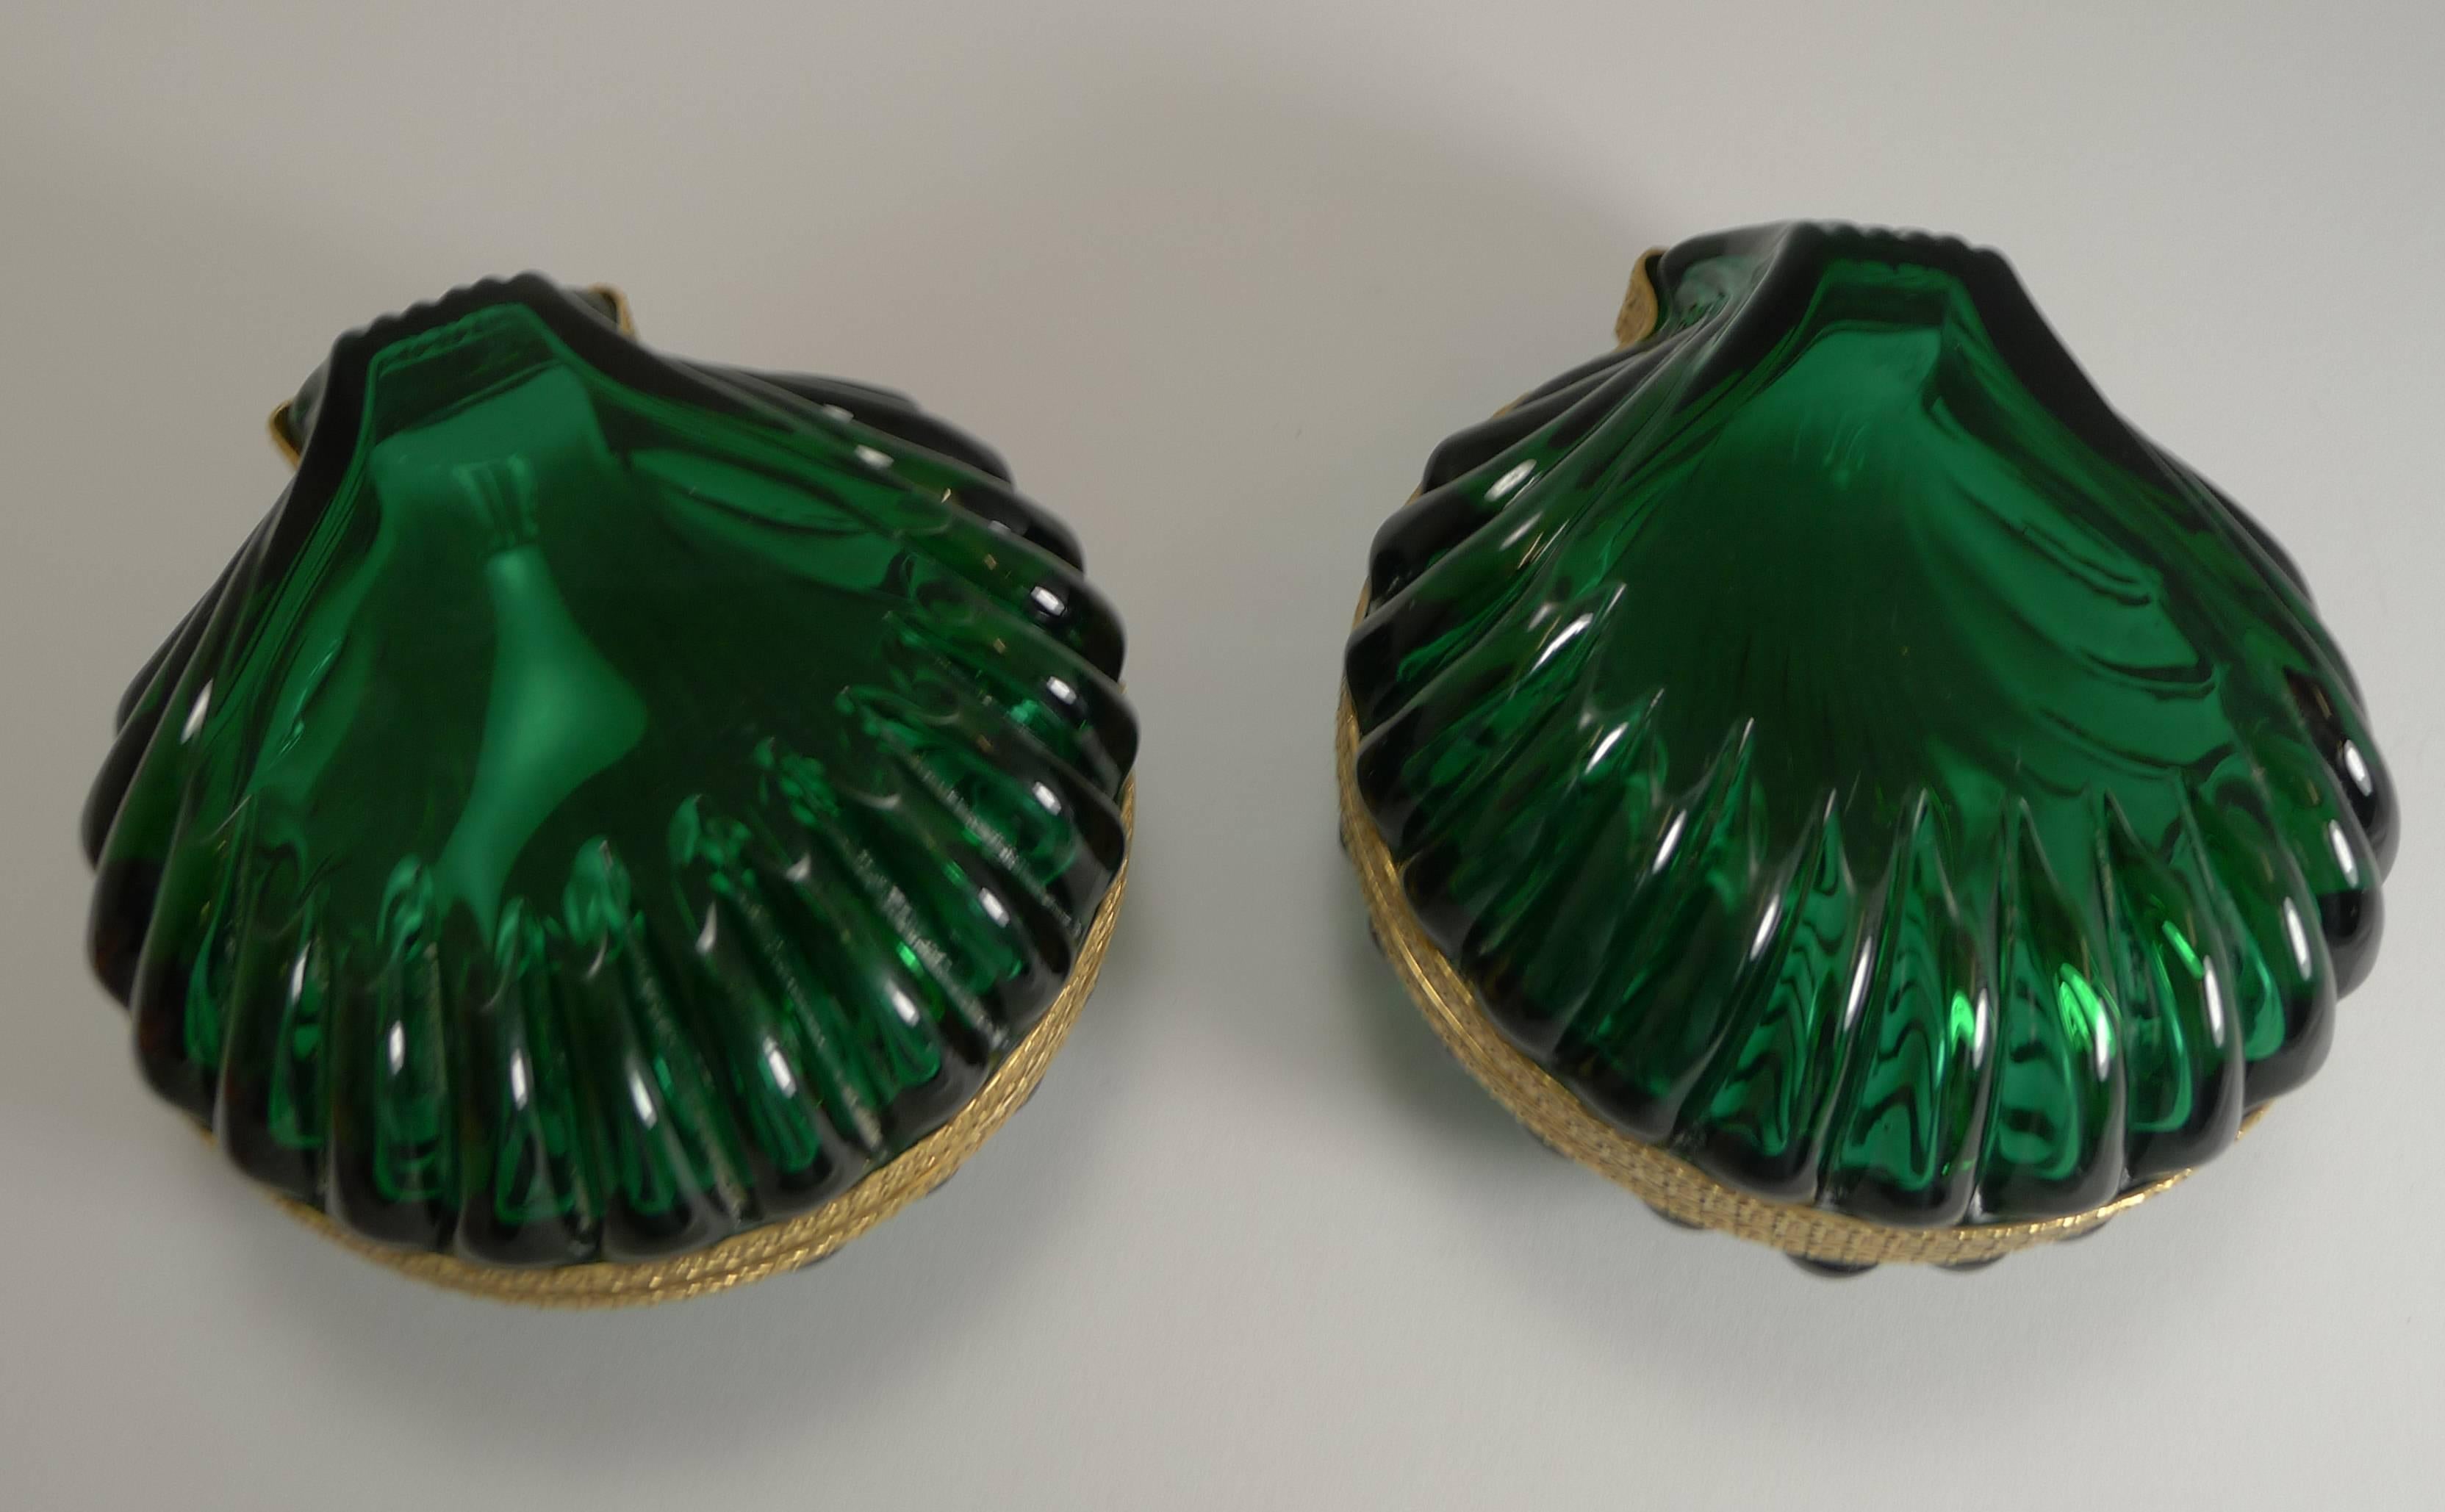 So very rare to find a pair of these and they are usually made from opaline glass, these though are made from a clear and vibrant Emerald green colour, really striking and colorful.

The beautiful and heavy crystal is trimmed in a dore bronze